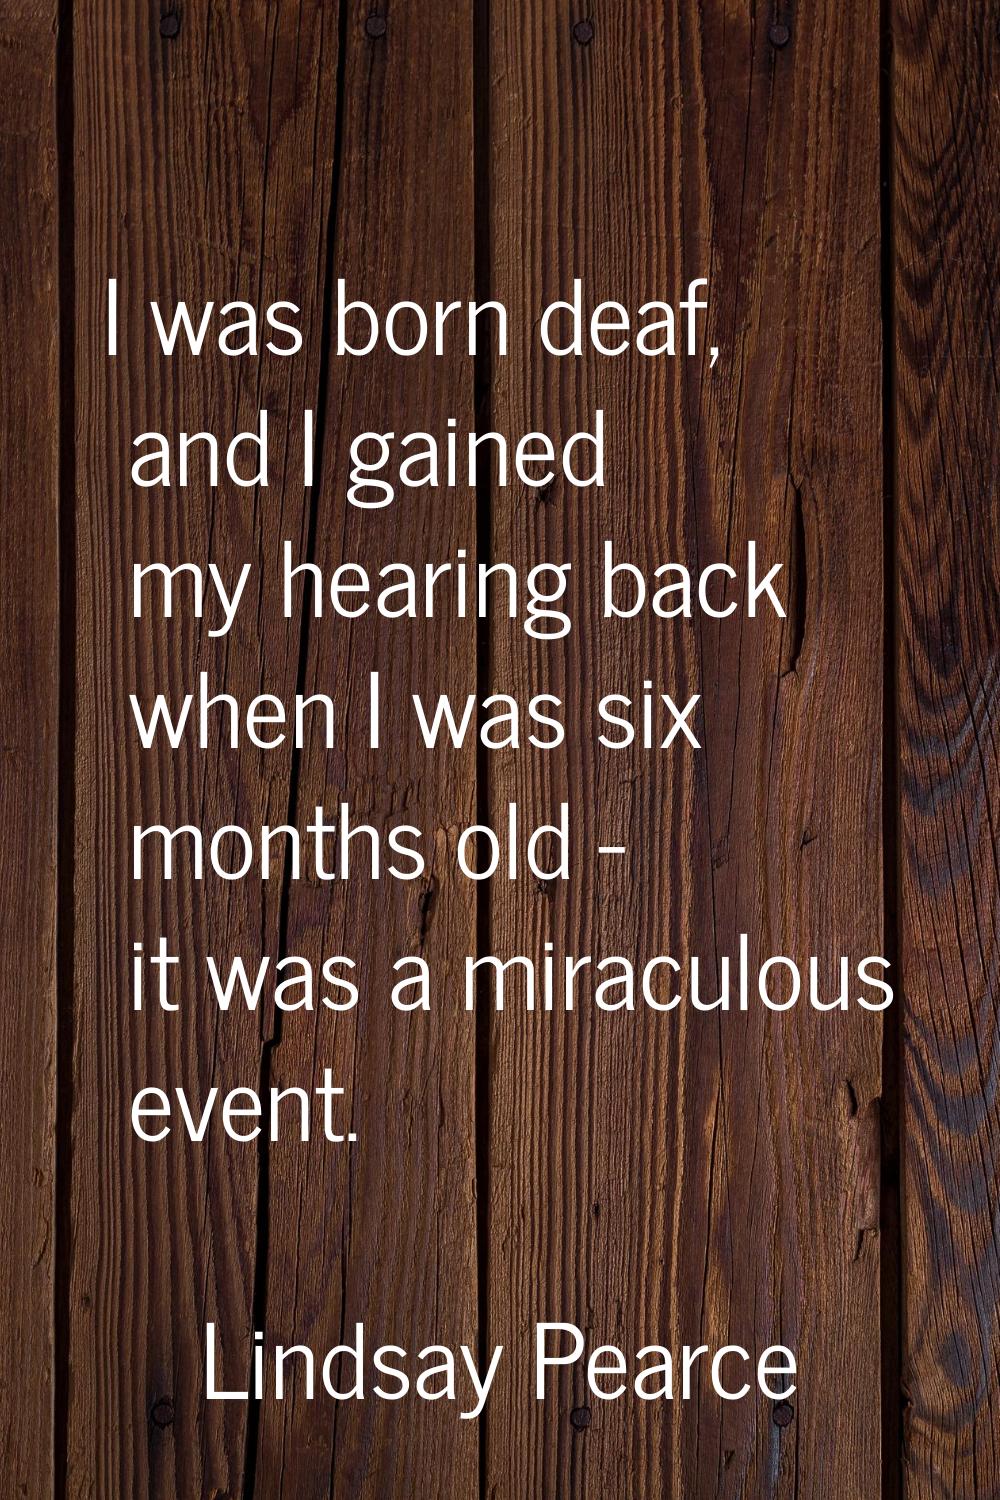 I was born deaf, and I gained my hearing back when I was six months old - it was a miraculous event